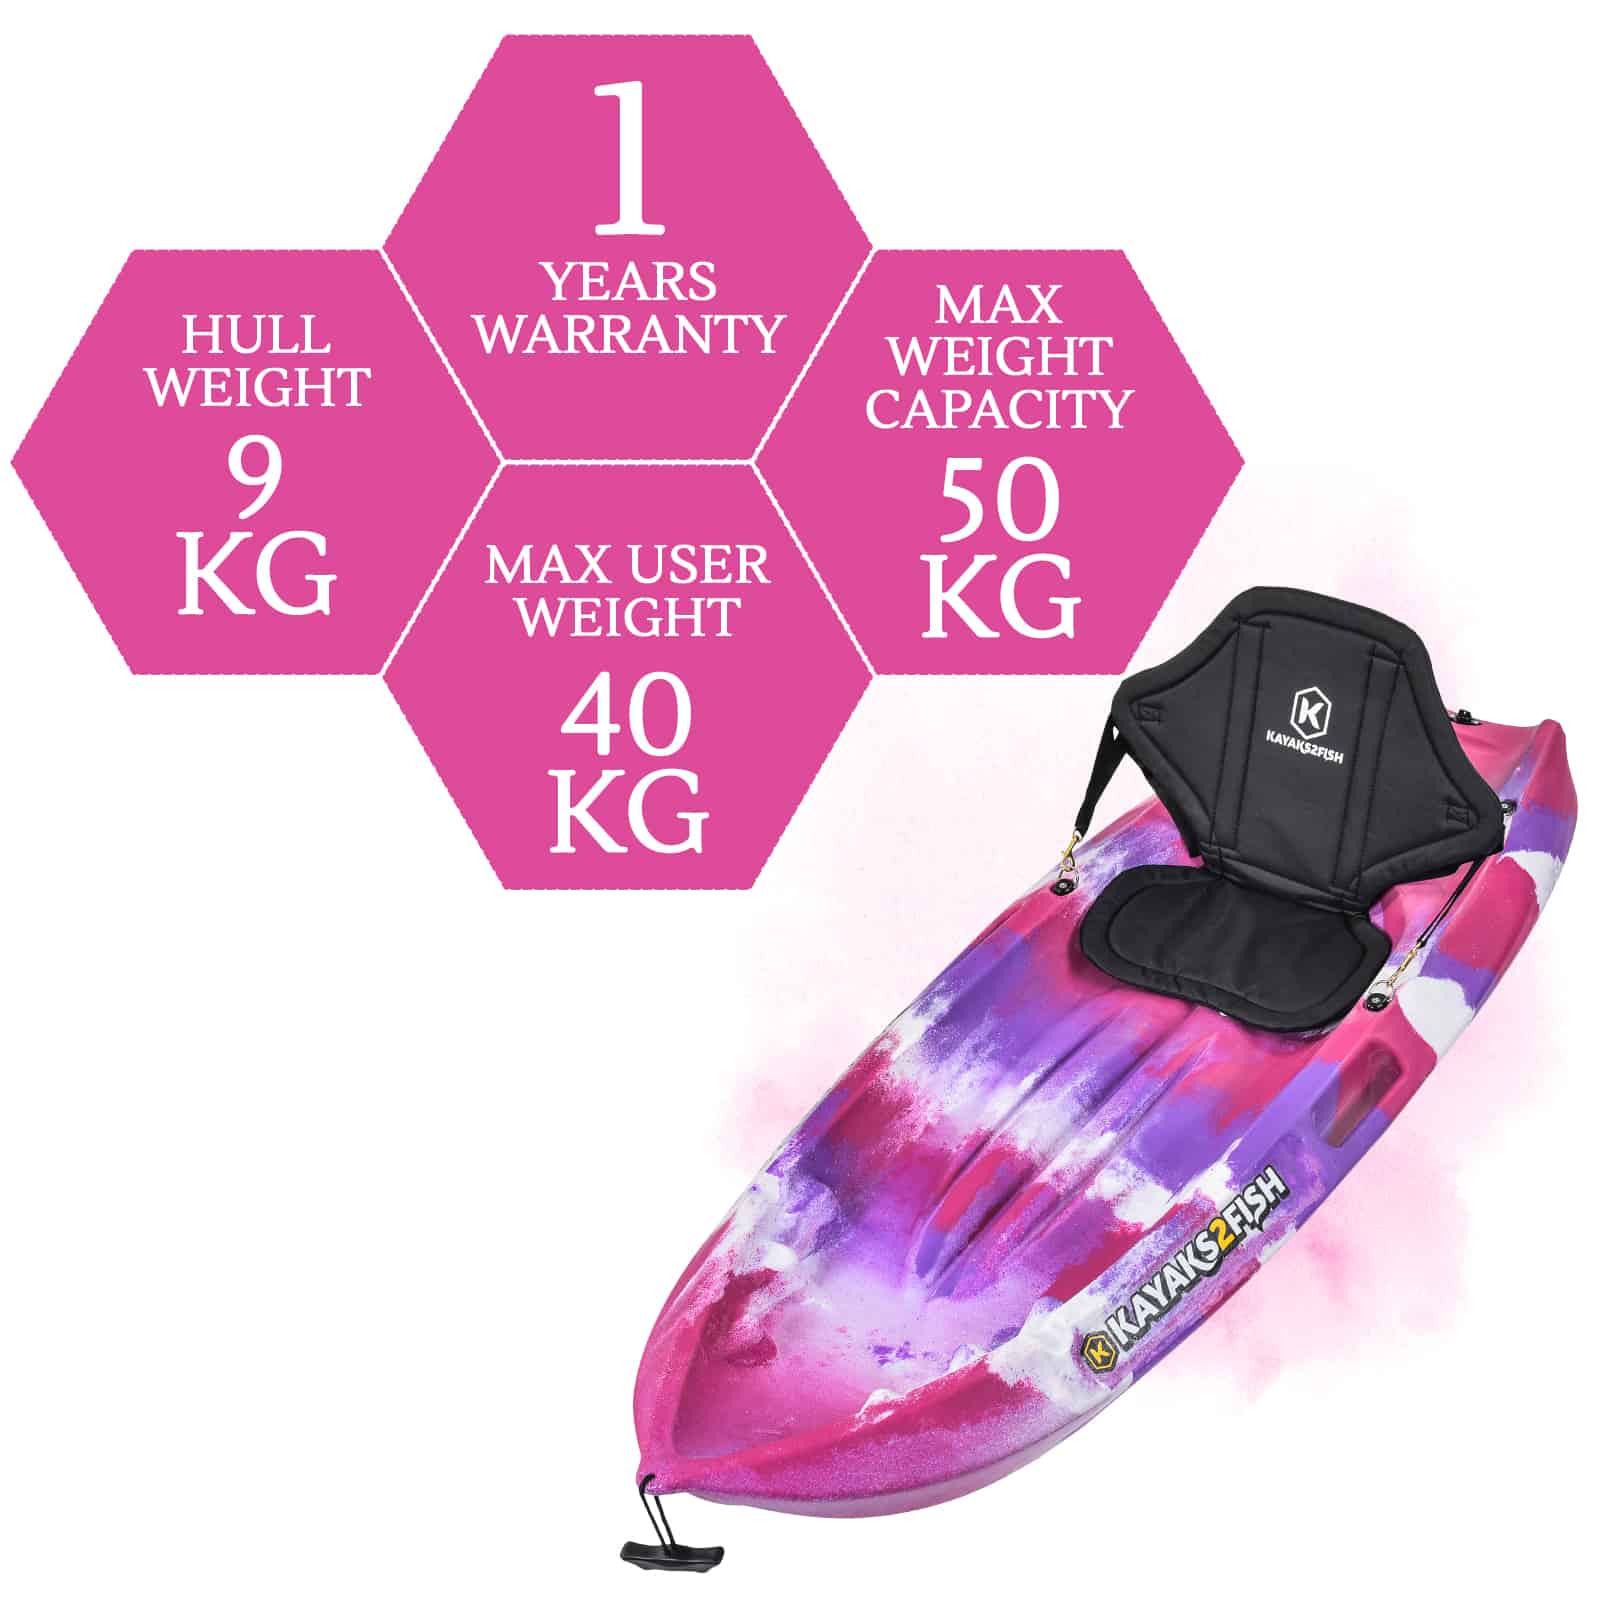 K2F-PUFFIN-PINKCAMO specifications